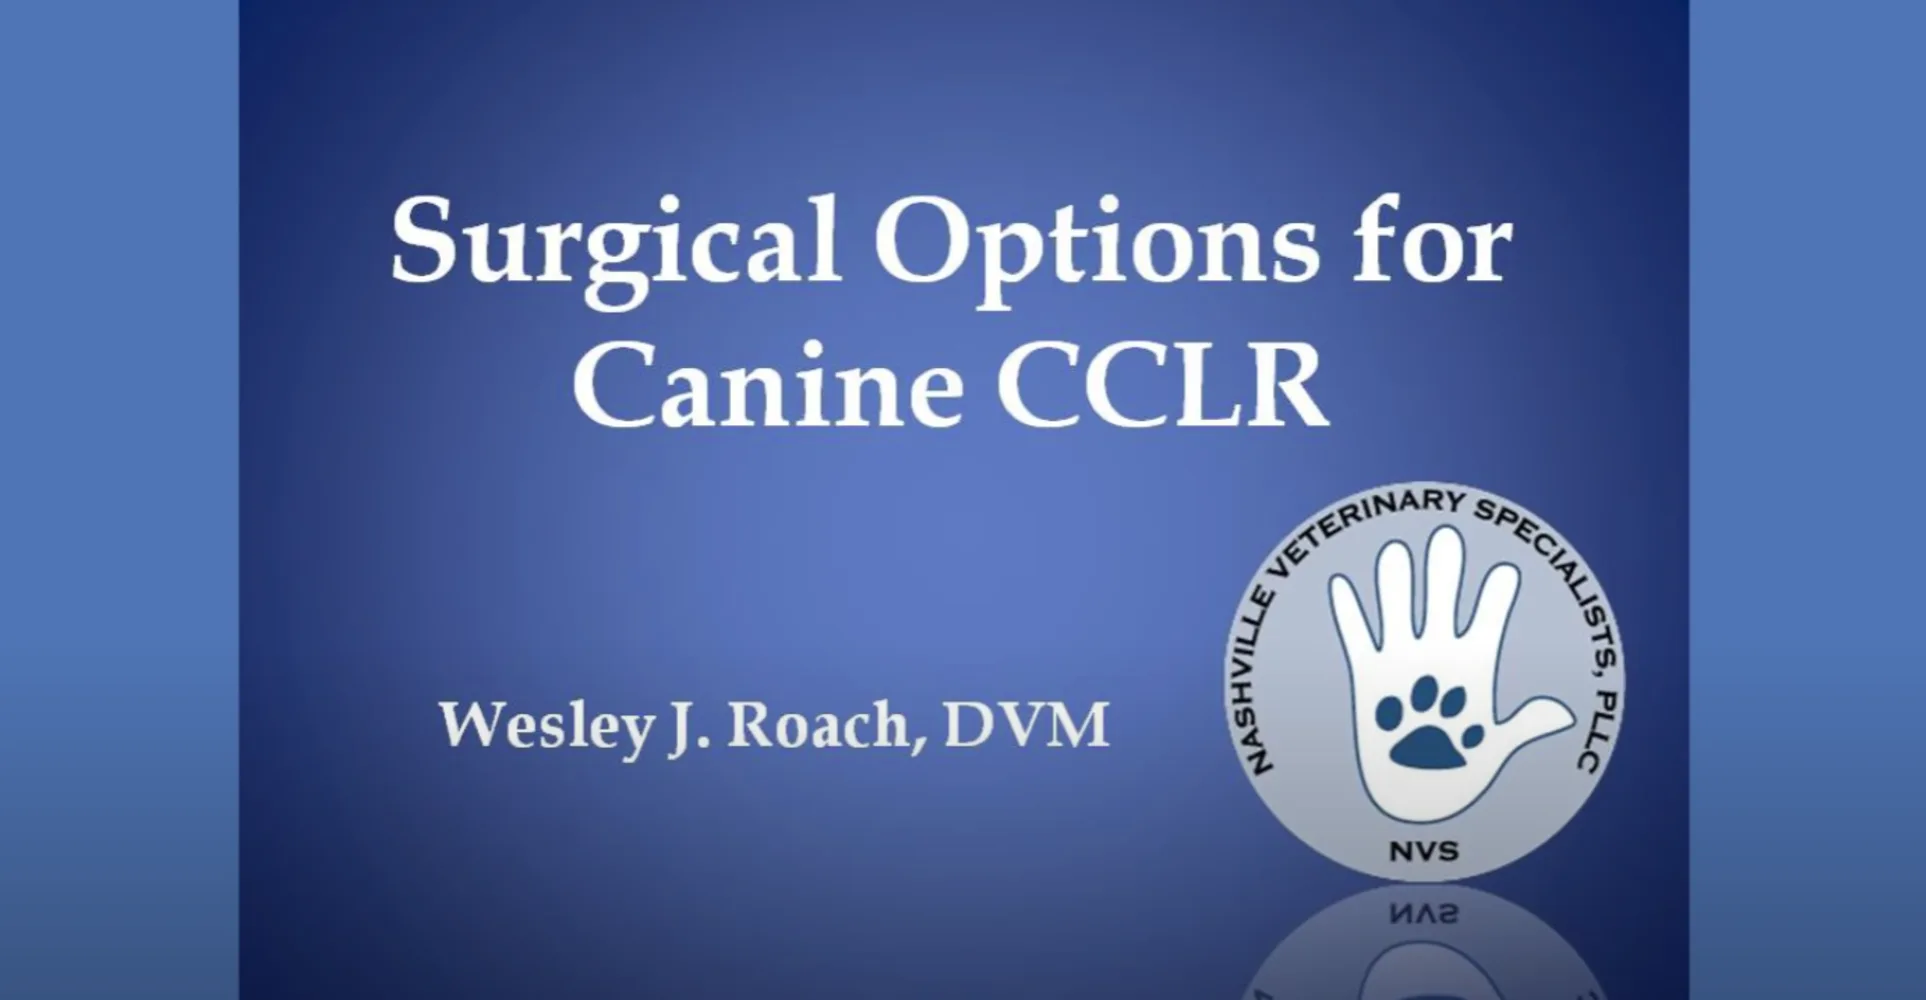 Surgical Options for Canine CCLR Video at NVS